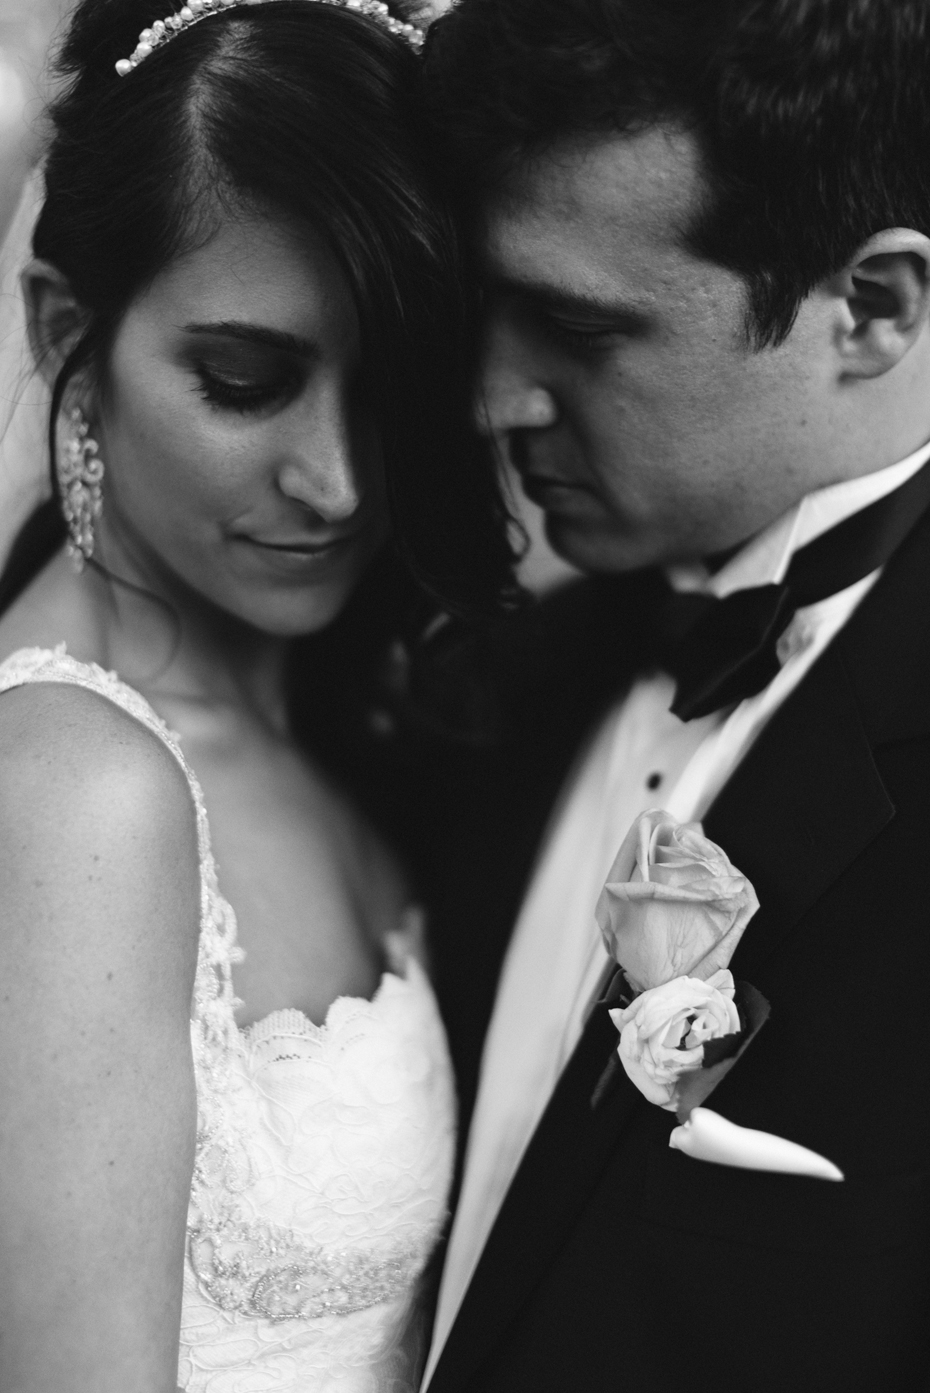 A moody black and white portrait of the bride and groom at the Noland Trail by Virginia Wedding Photographer, Heather Jowett.